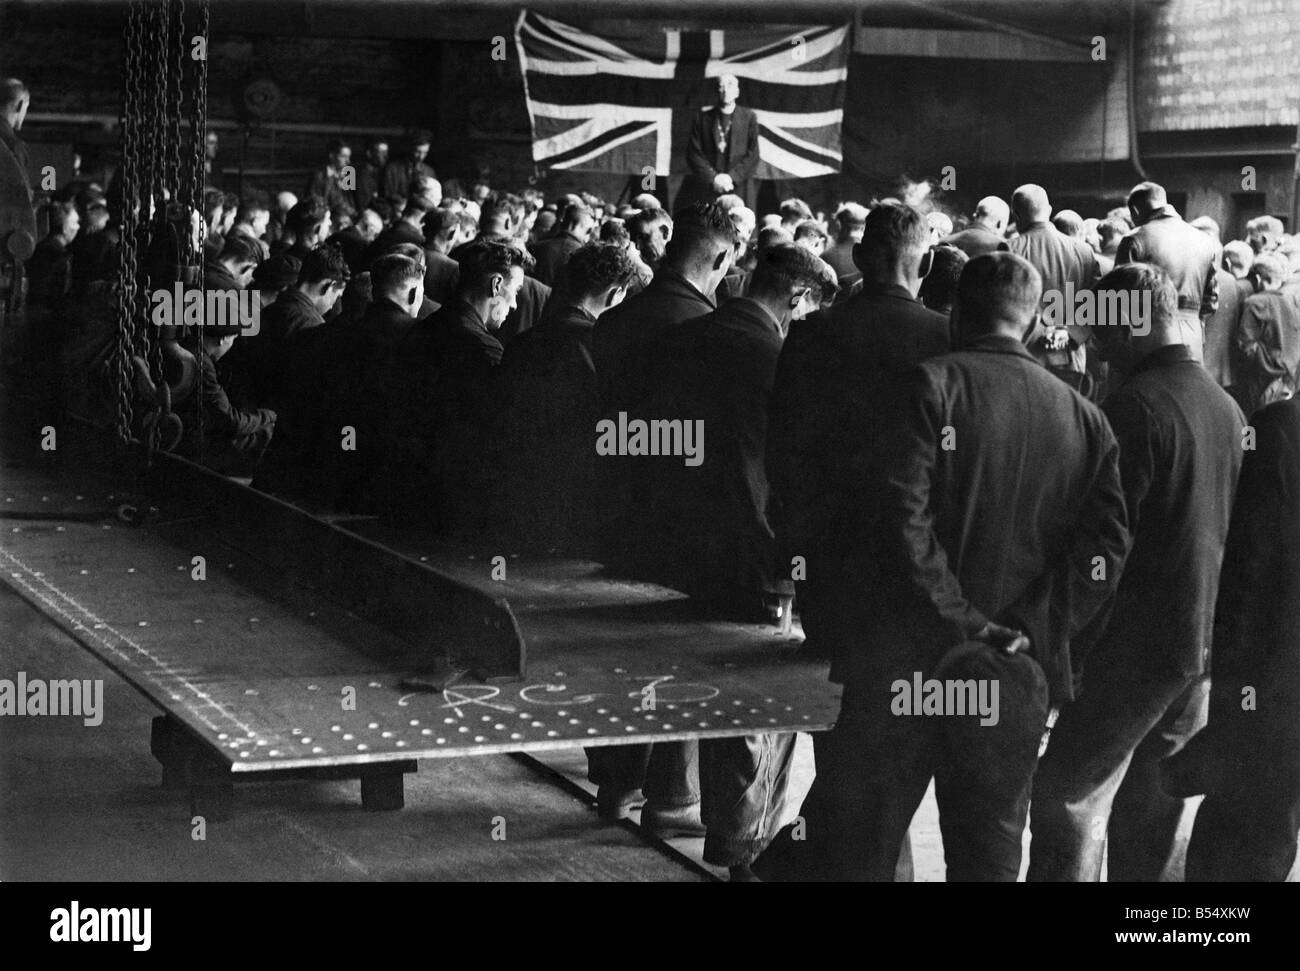 World War II Religion. Lunchtime prayer in the shipyard. So that there would be no interference with production the National Prayer Service in a N. East Shipyard was held during the lunchtime break. Hundreds of men stood with their heads bowed, following the Bishop of Durham, Dr. Alwyn. Williams as he said the Lord's Prayer. The short simple service lasted ten minutes, and as the whistle blow to recommence work, once again the stillness was broken by the hammering of rivets, and the clanging of steel plates, which will go down to the sea in ships to fight for freedom....September 1942 P011612 Stock Photo